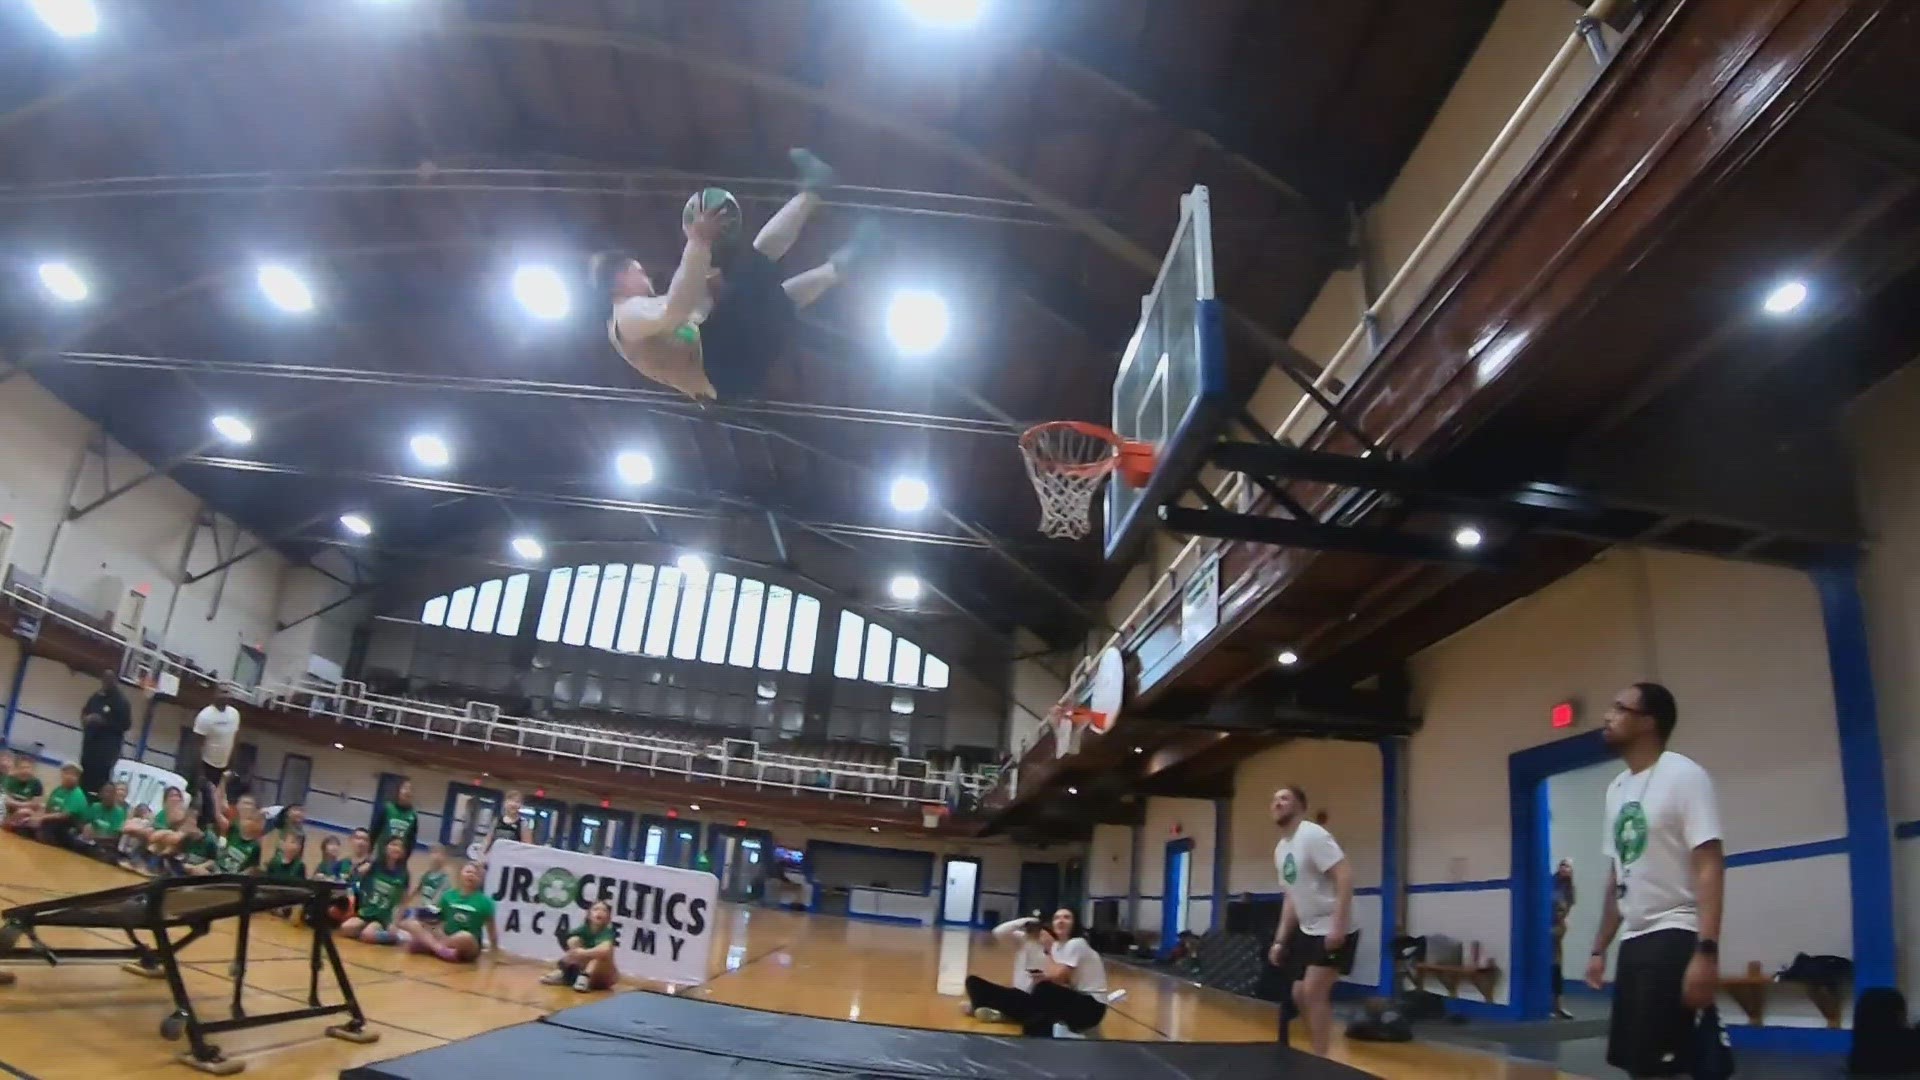 The mascot showed off his dunking routine inside the Lewiston Armory for 100 campers on Wednesday.